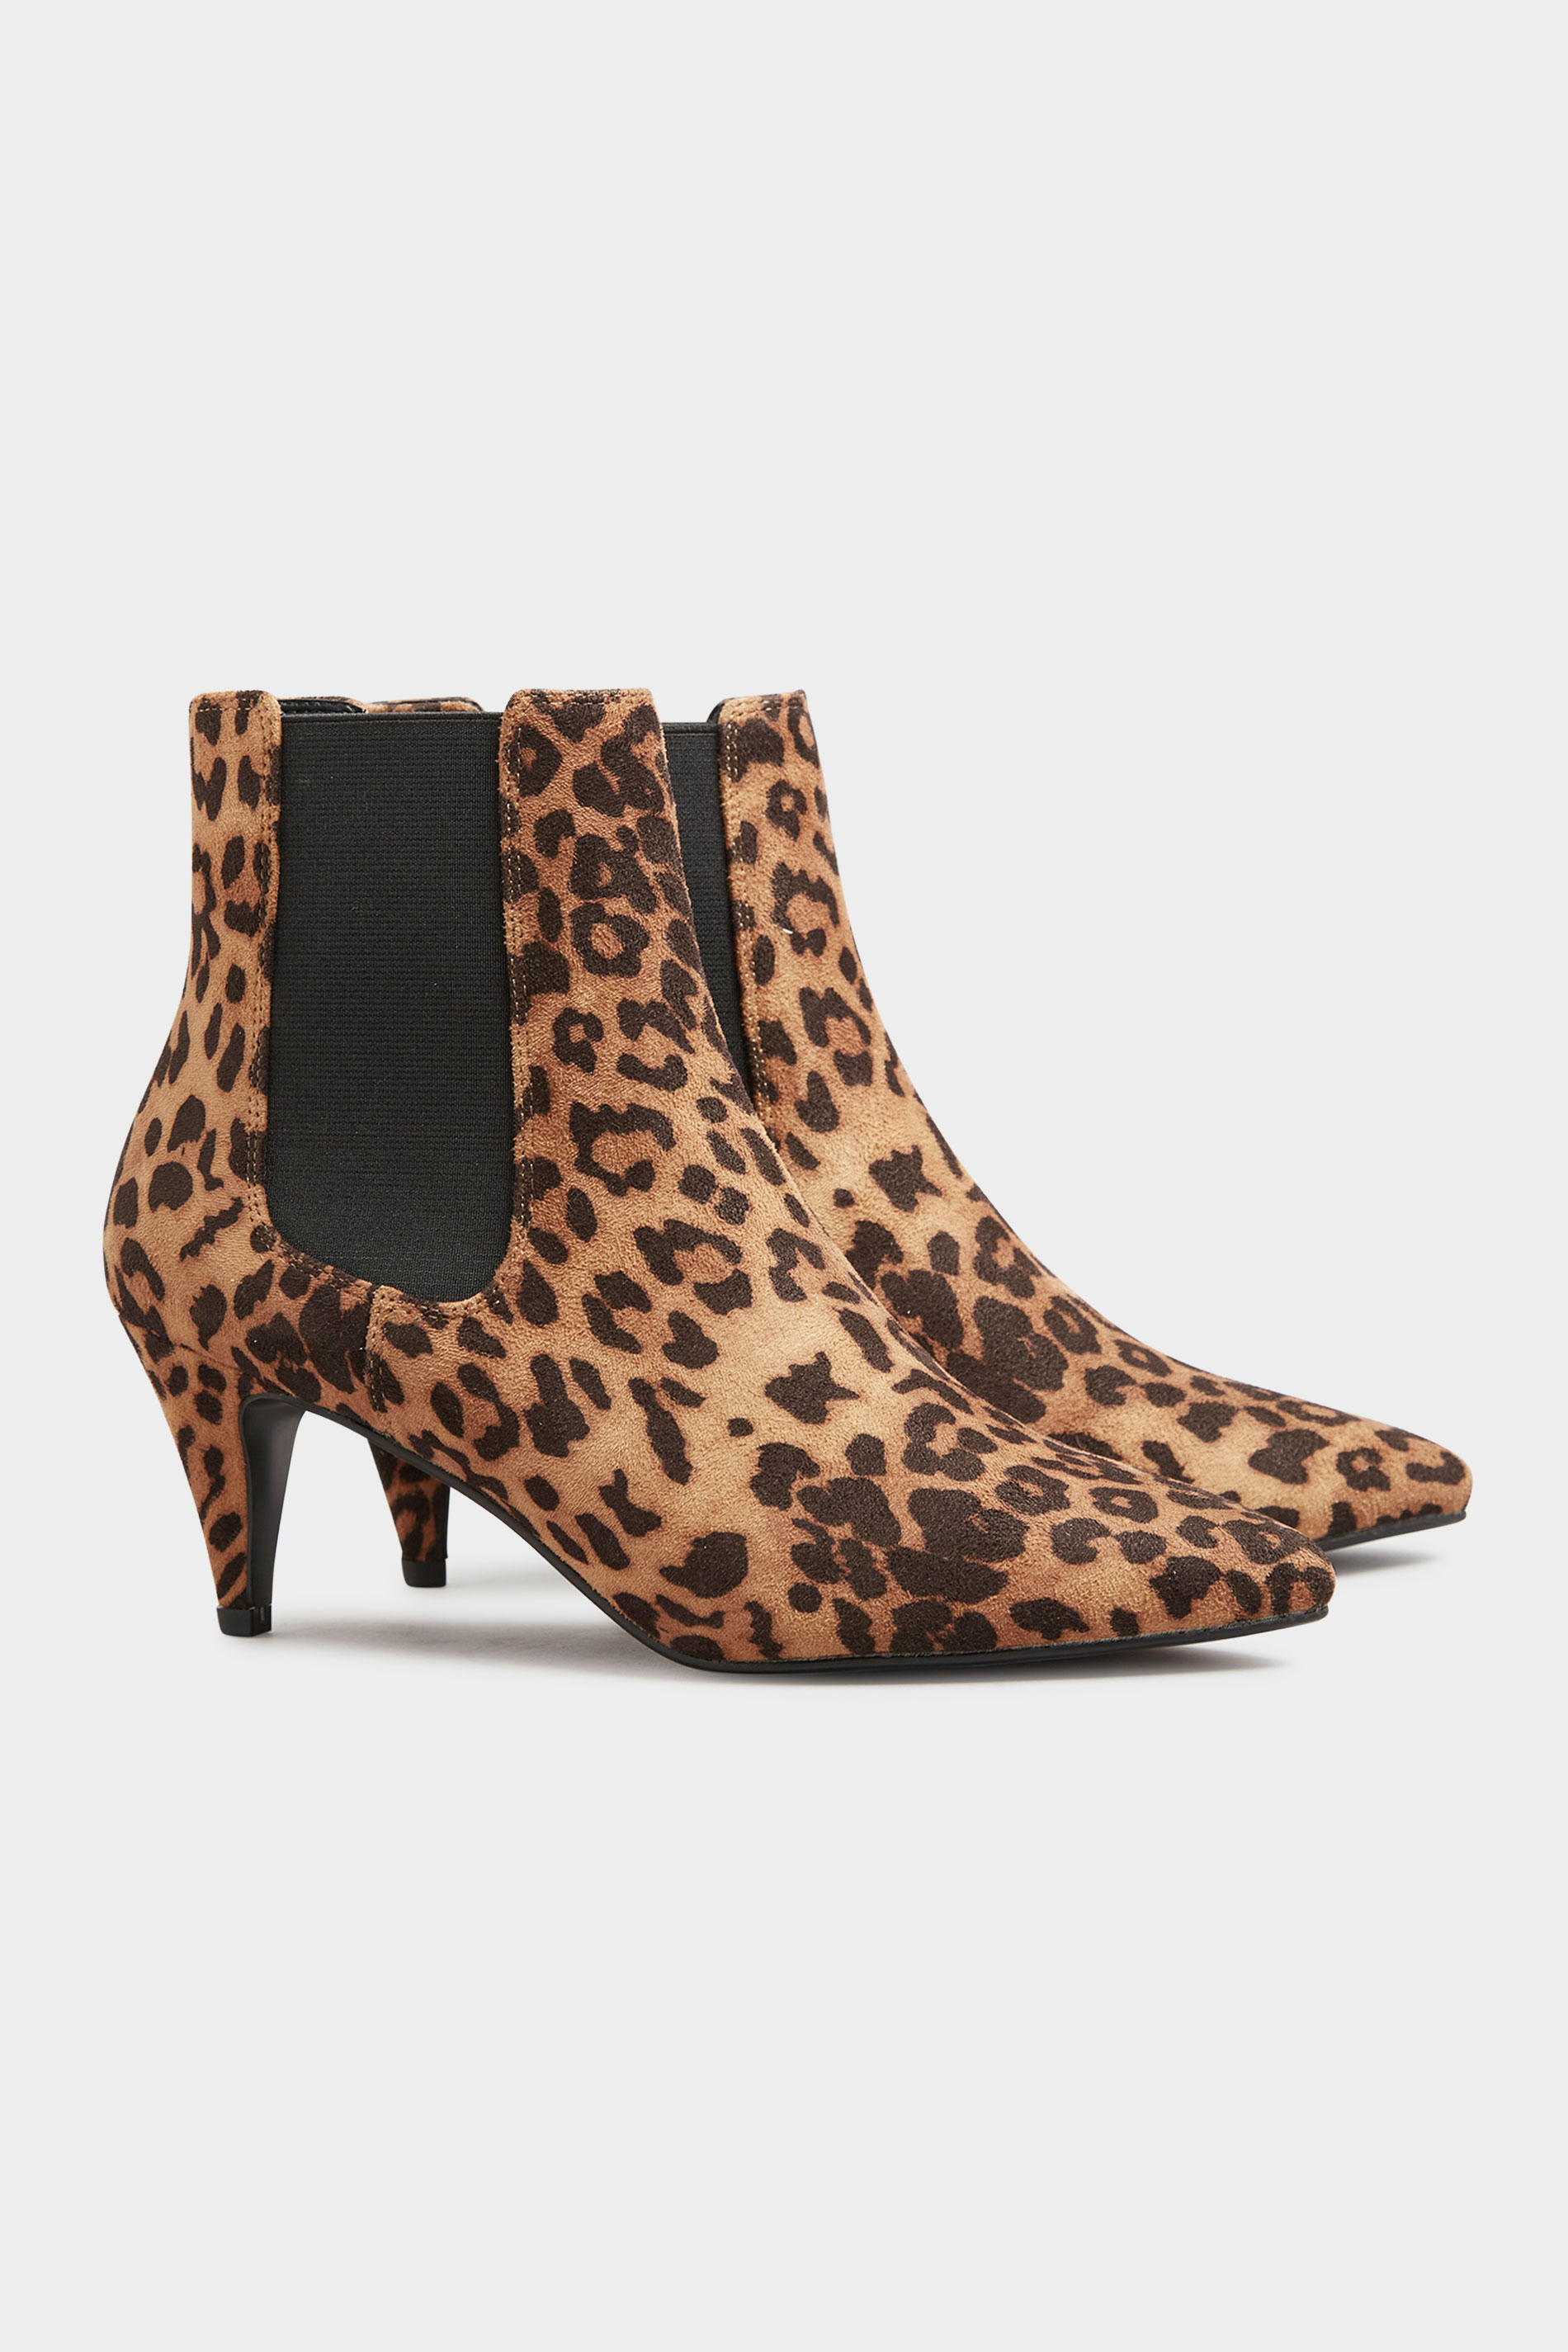 LTS Brown Leopard Print Heeled Boots In Standard D Fit 1